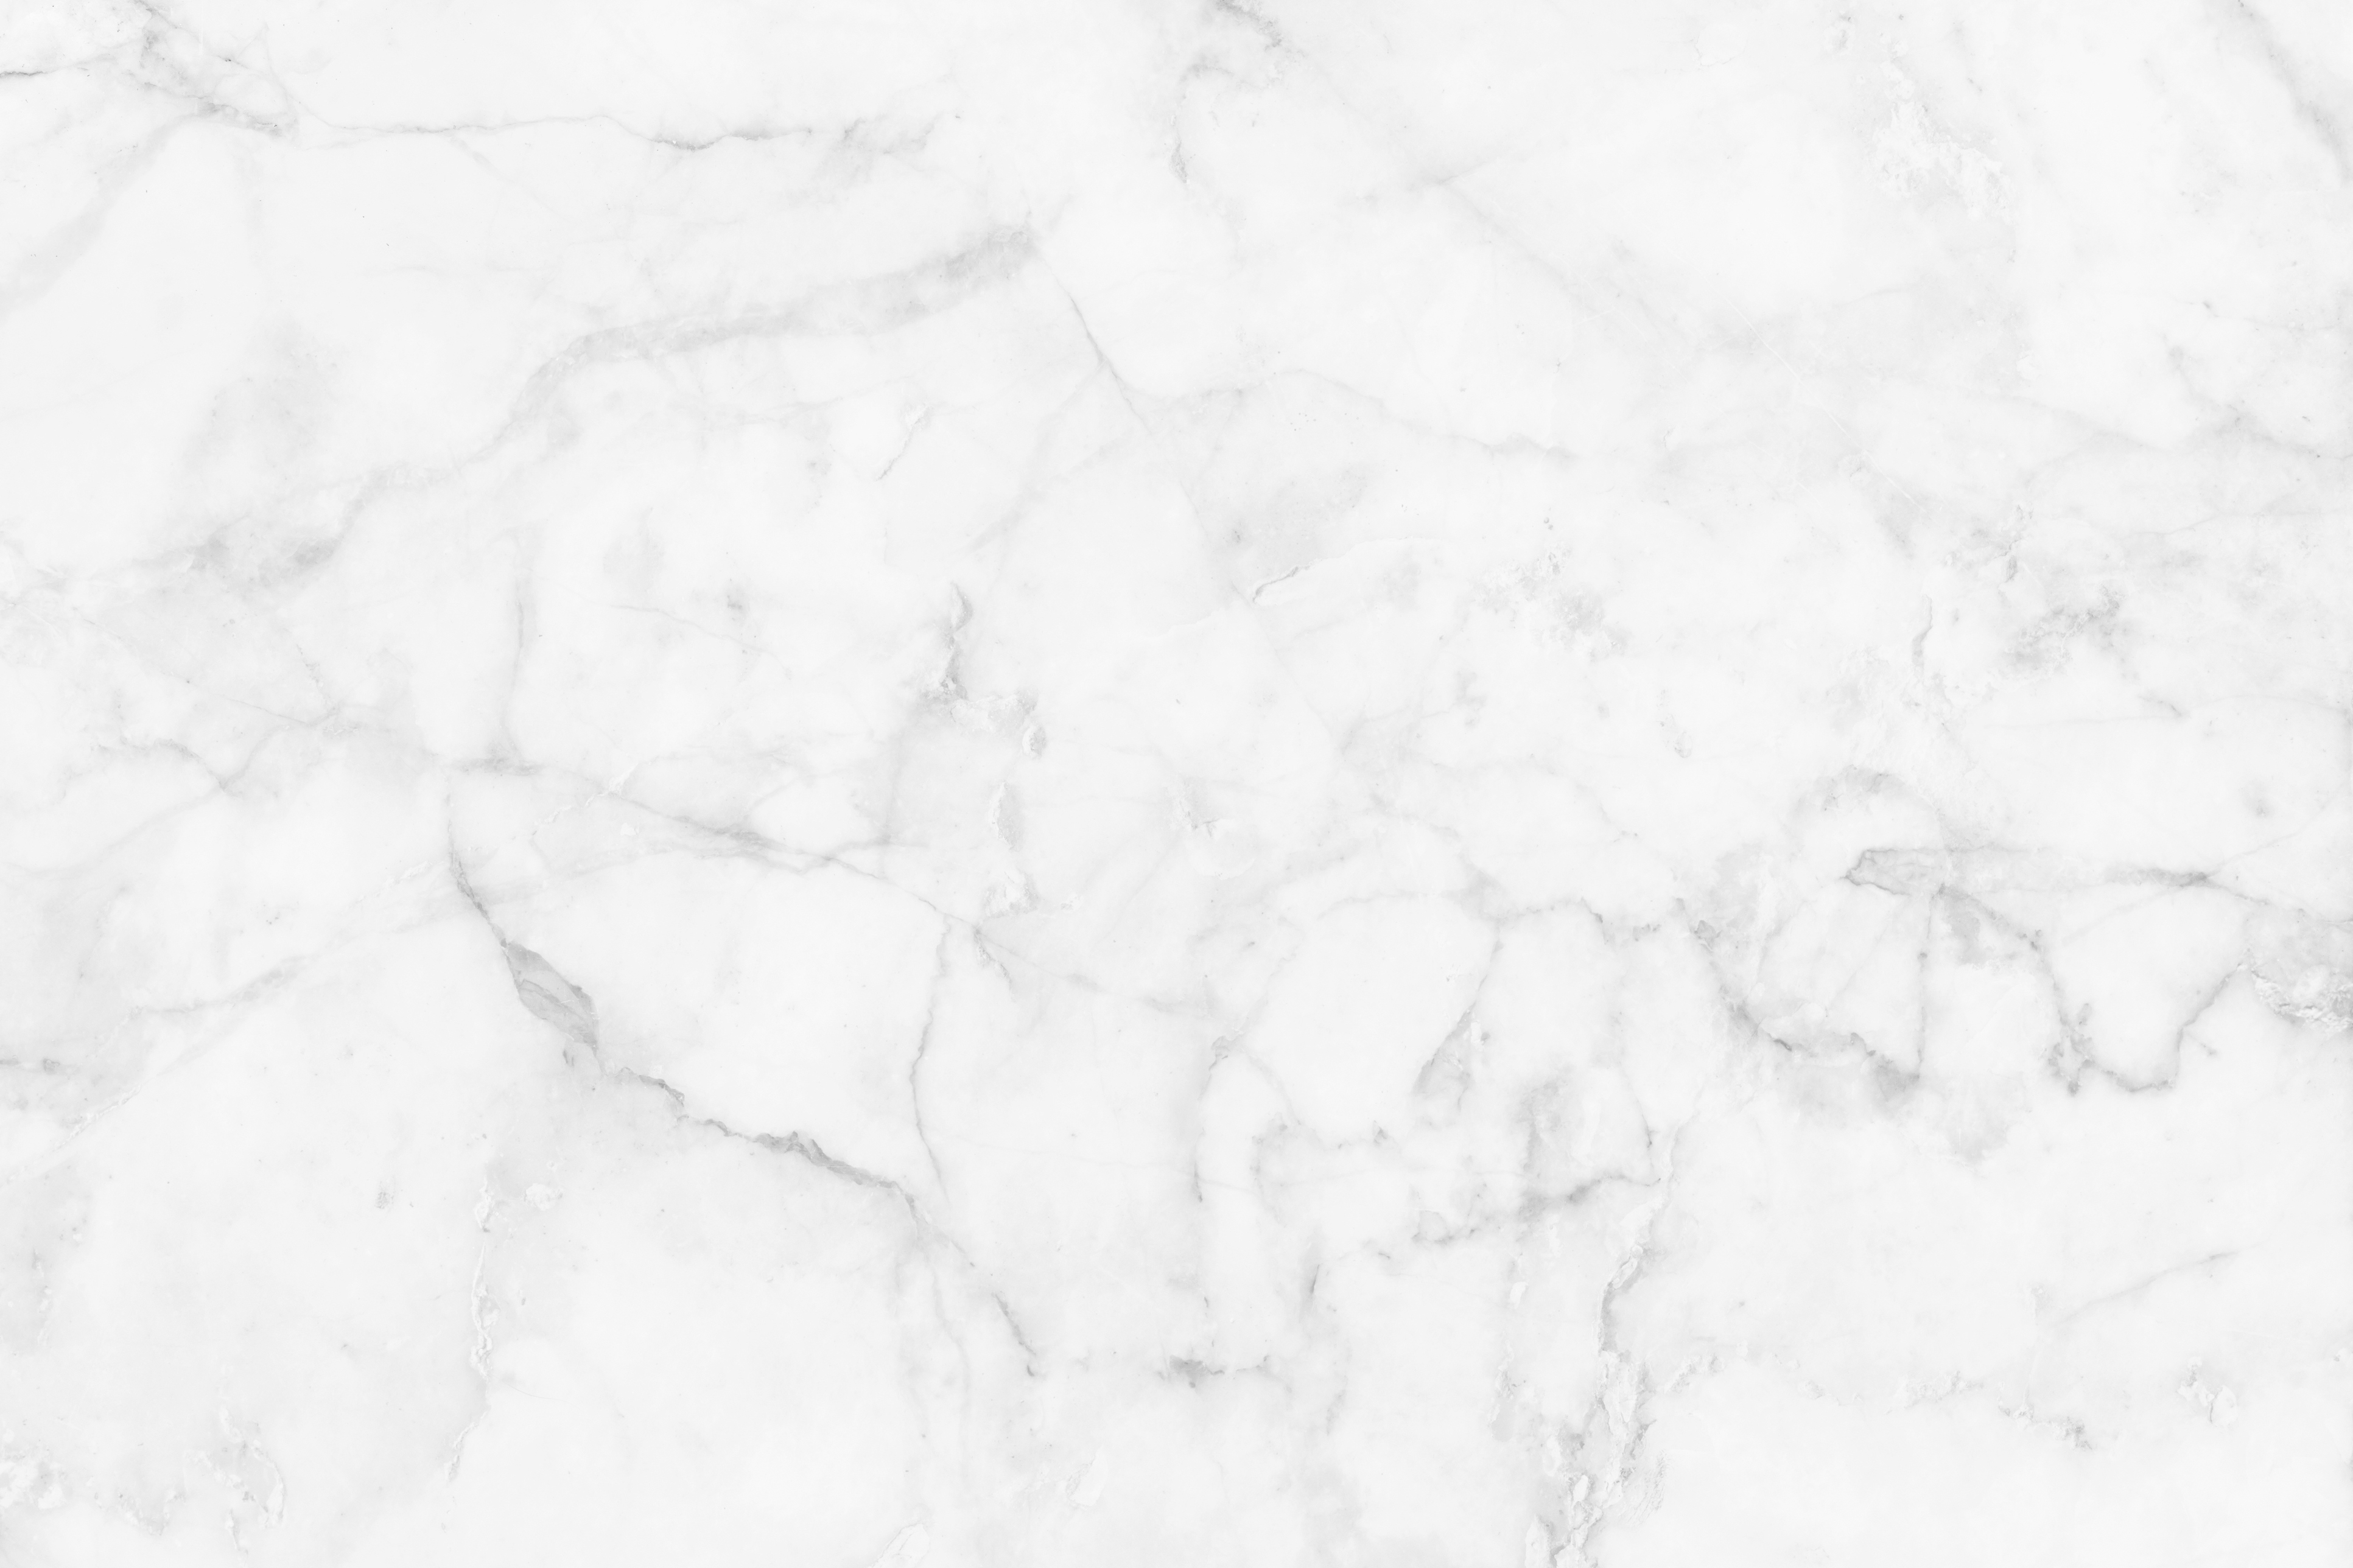 White marble patterned texture background. - Trattoria Arlati